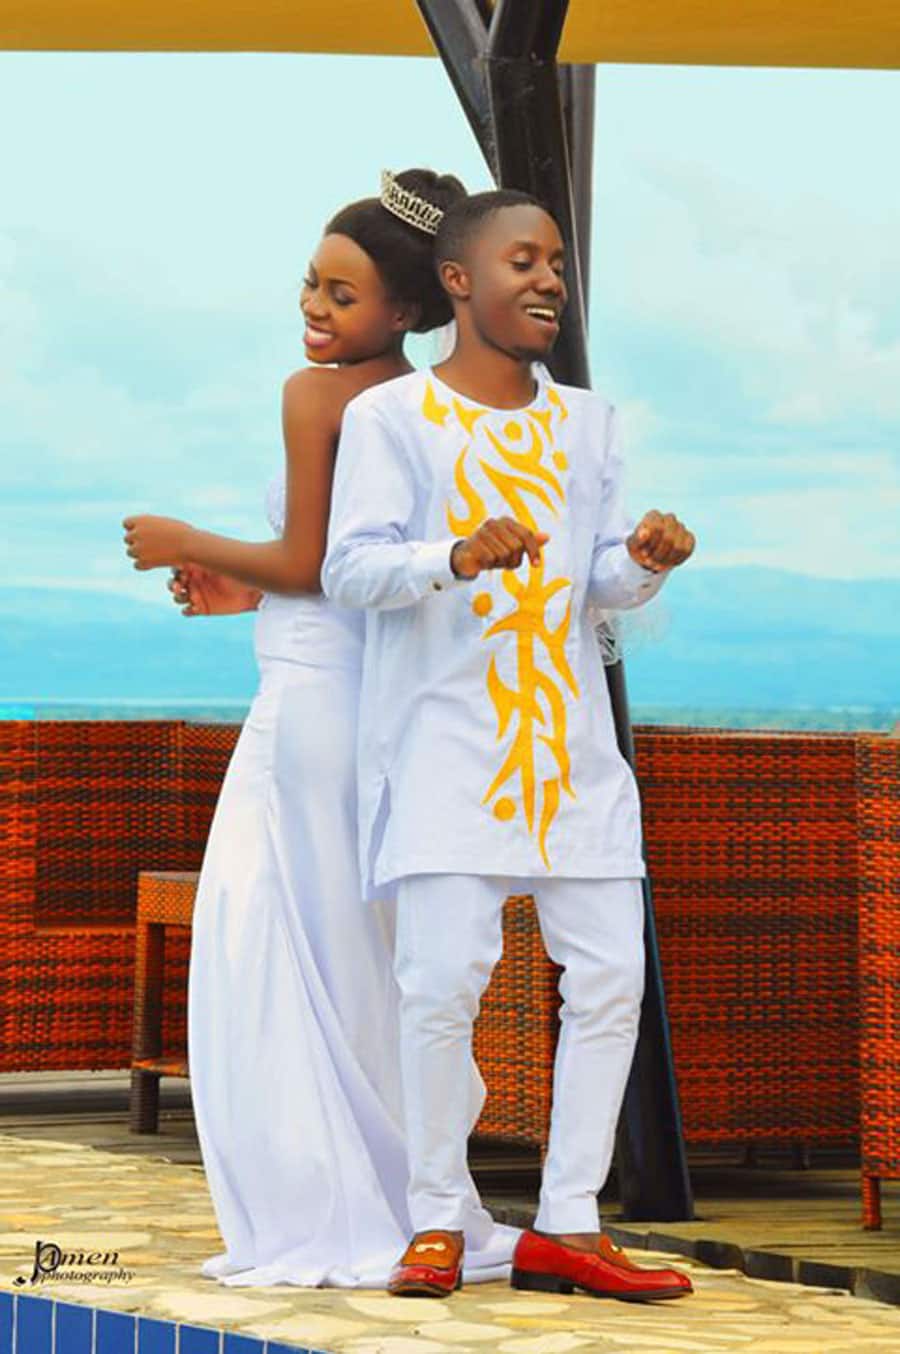 Ugandan singer holds lavish wedding with only 11 invited guests